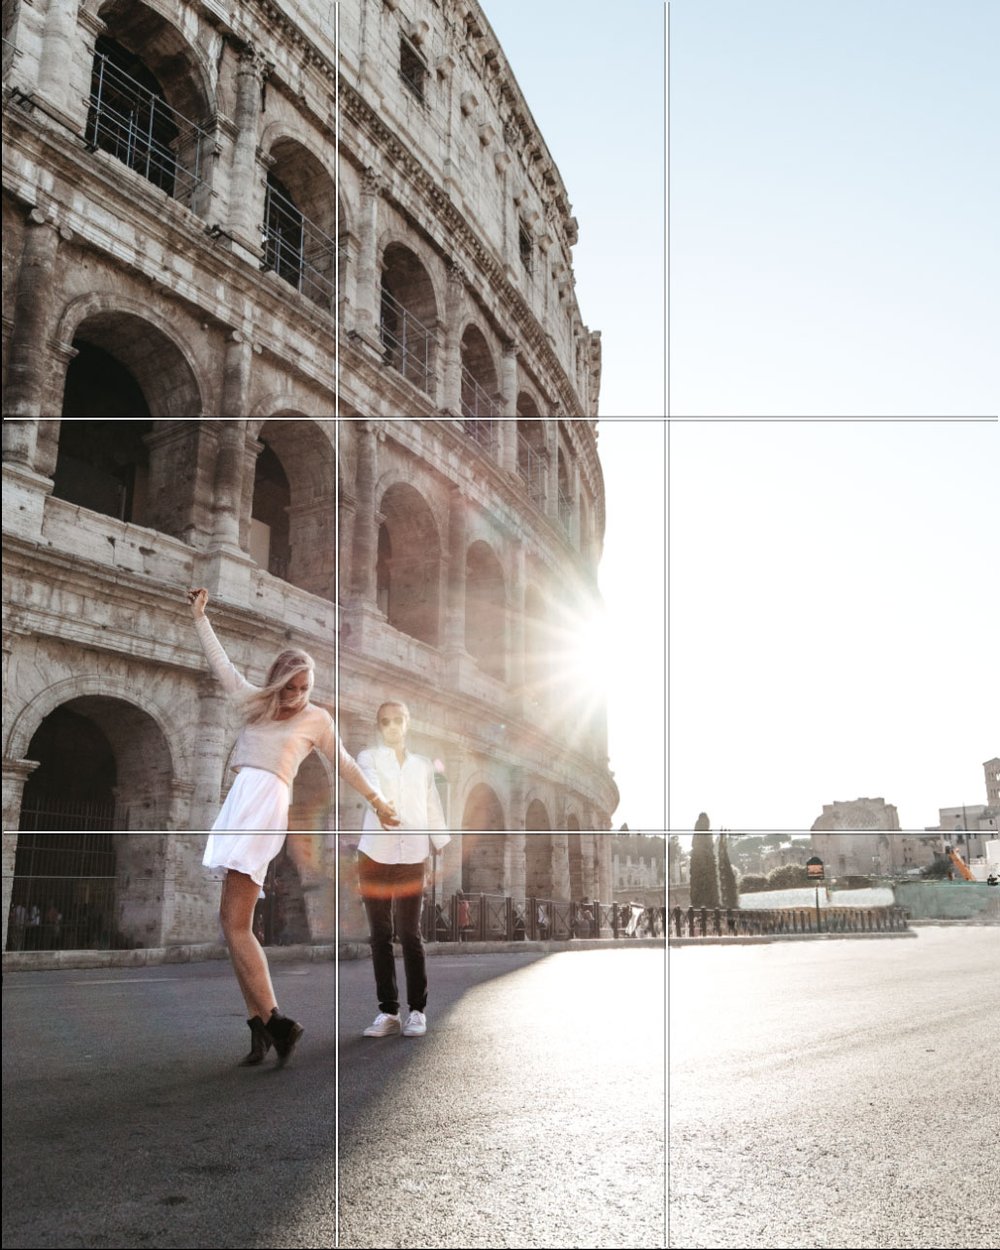 Rule of Thirds Grid Alignment